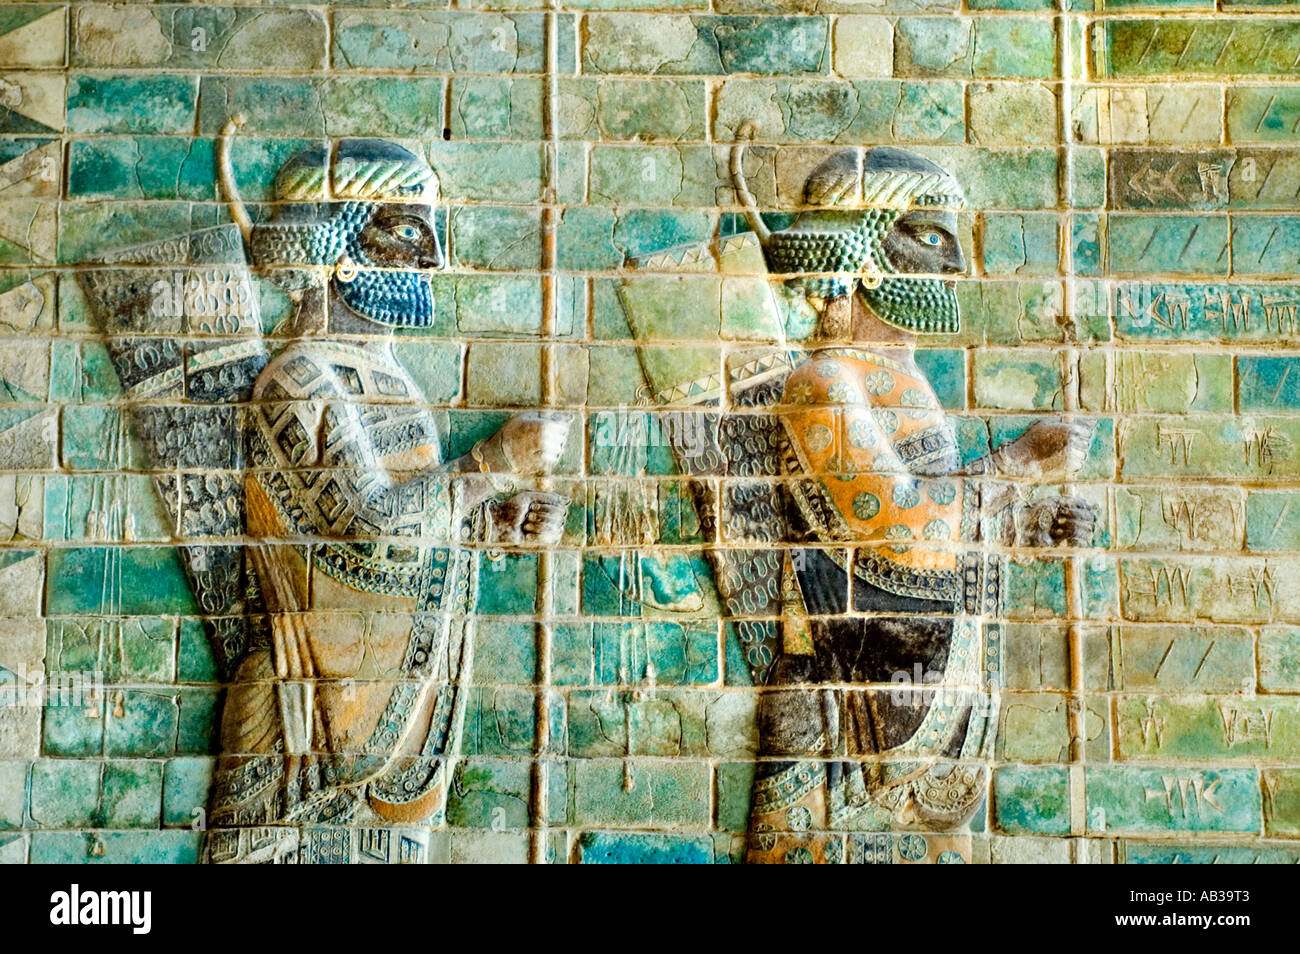 Persian Archers Dressed in Richly Decorative Attire Excavated from the Palace of Darius (510 BC), Susa, Iran.